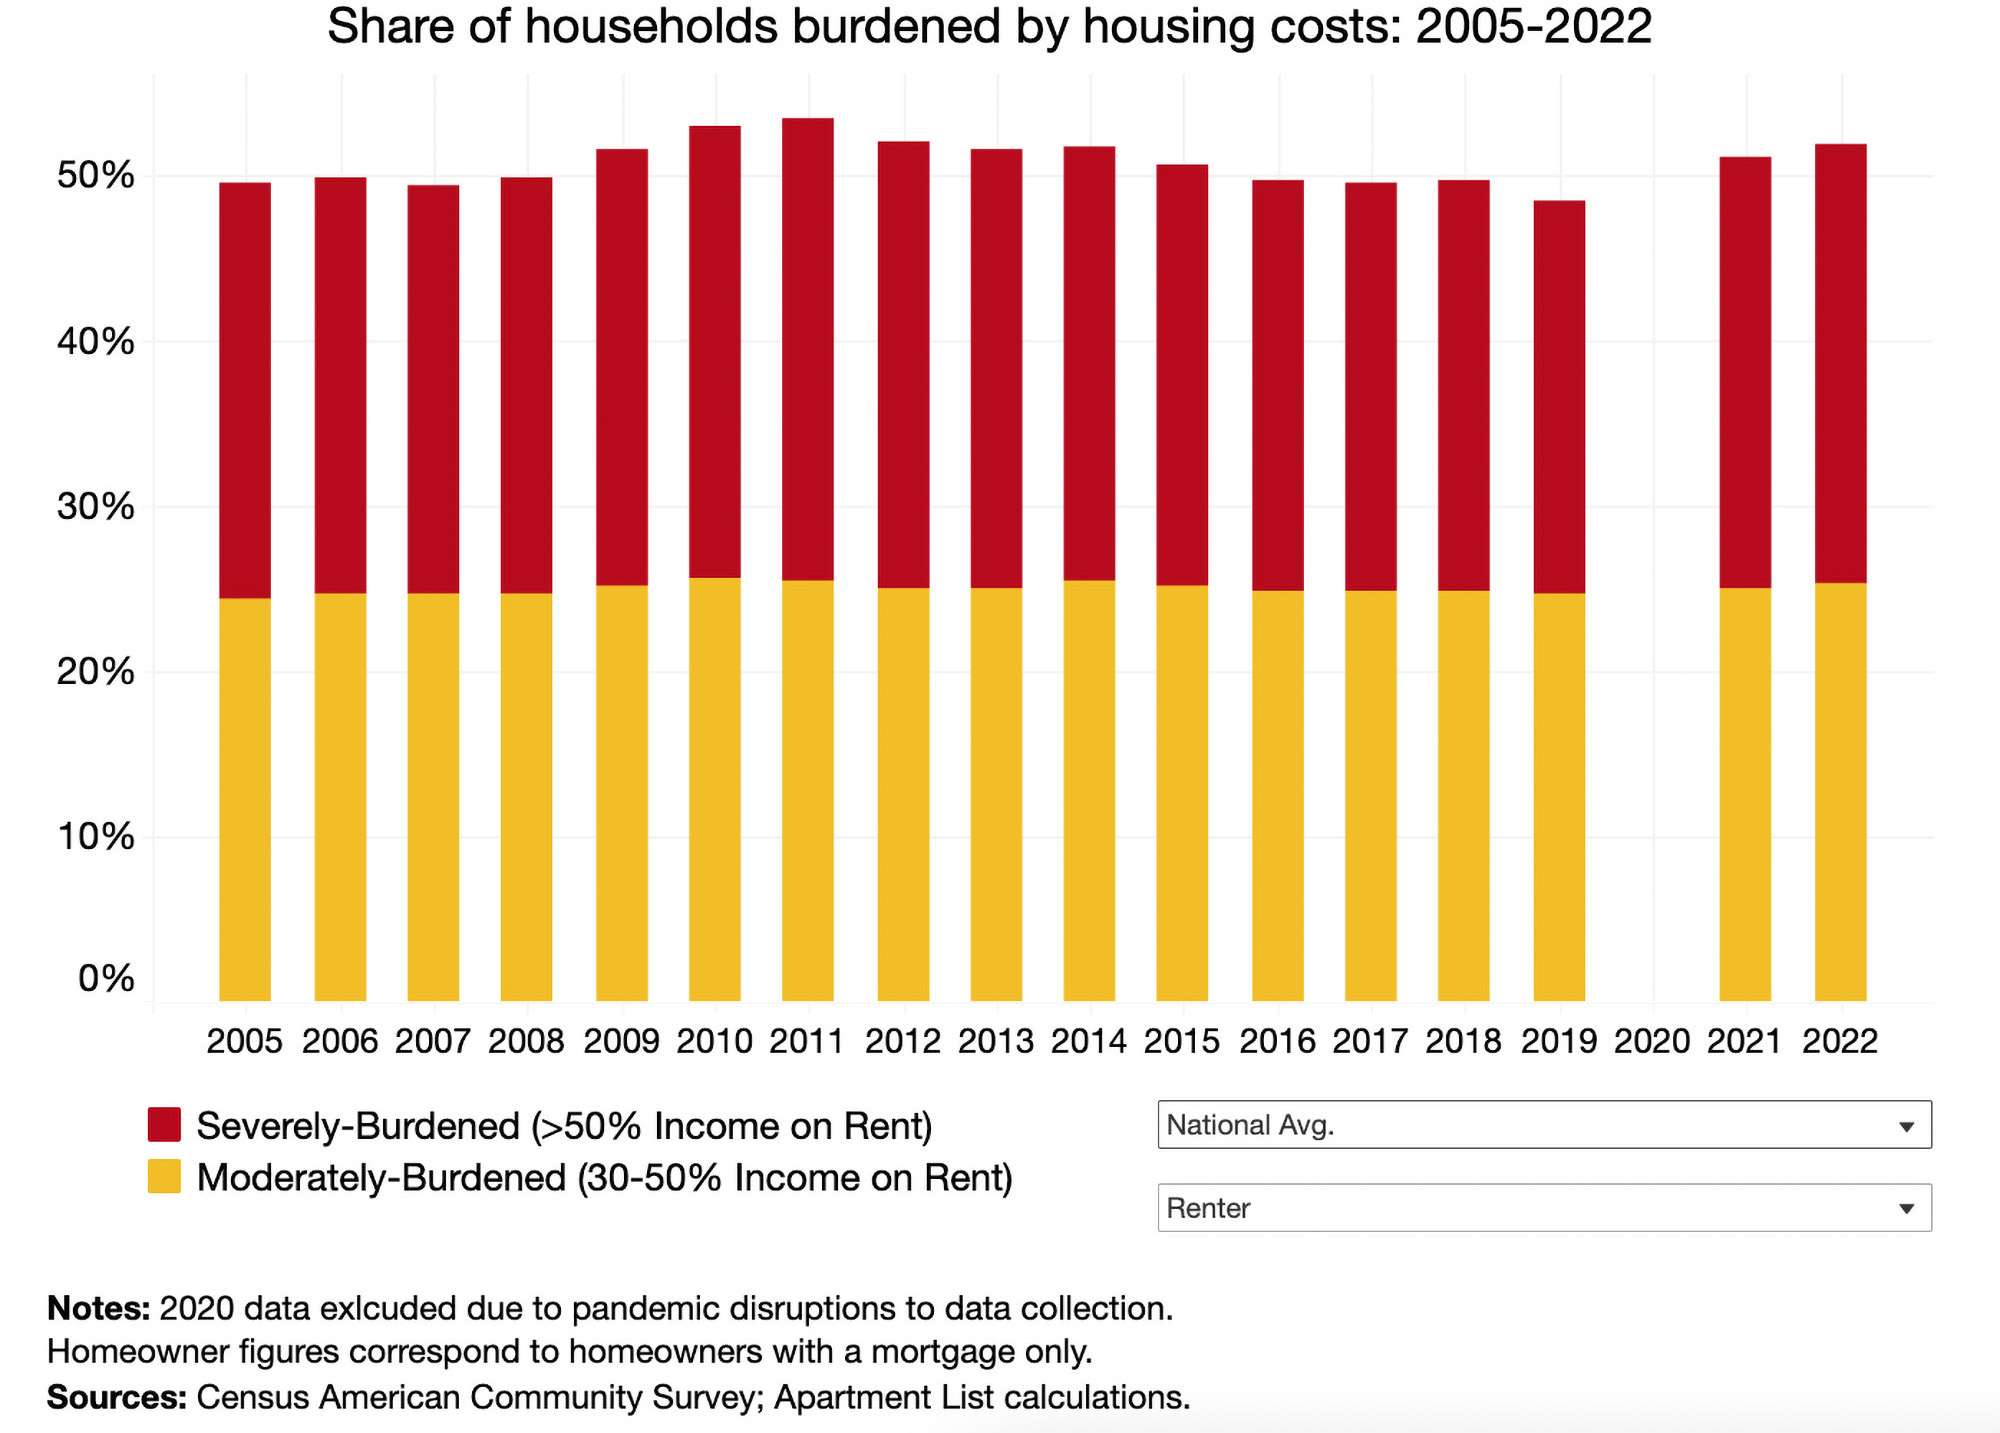 House cost burden chart comparing moderately to severely burdened renters since 2005